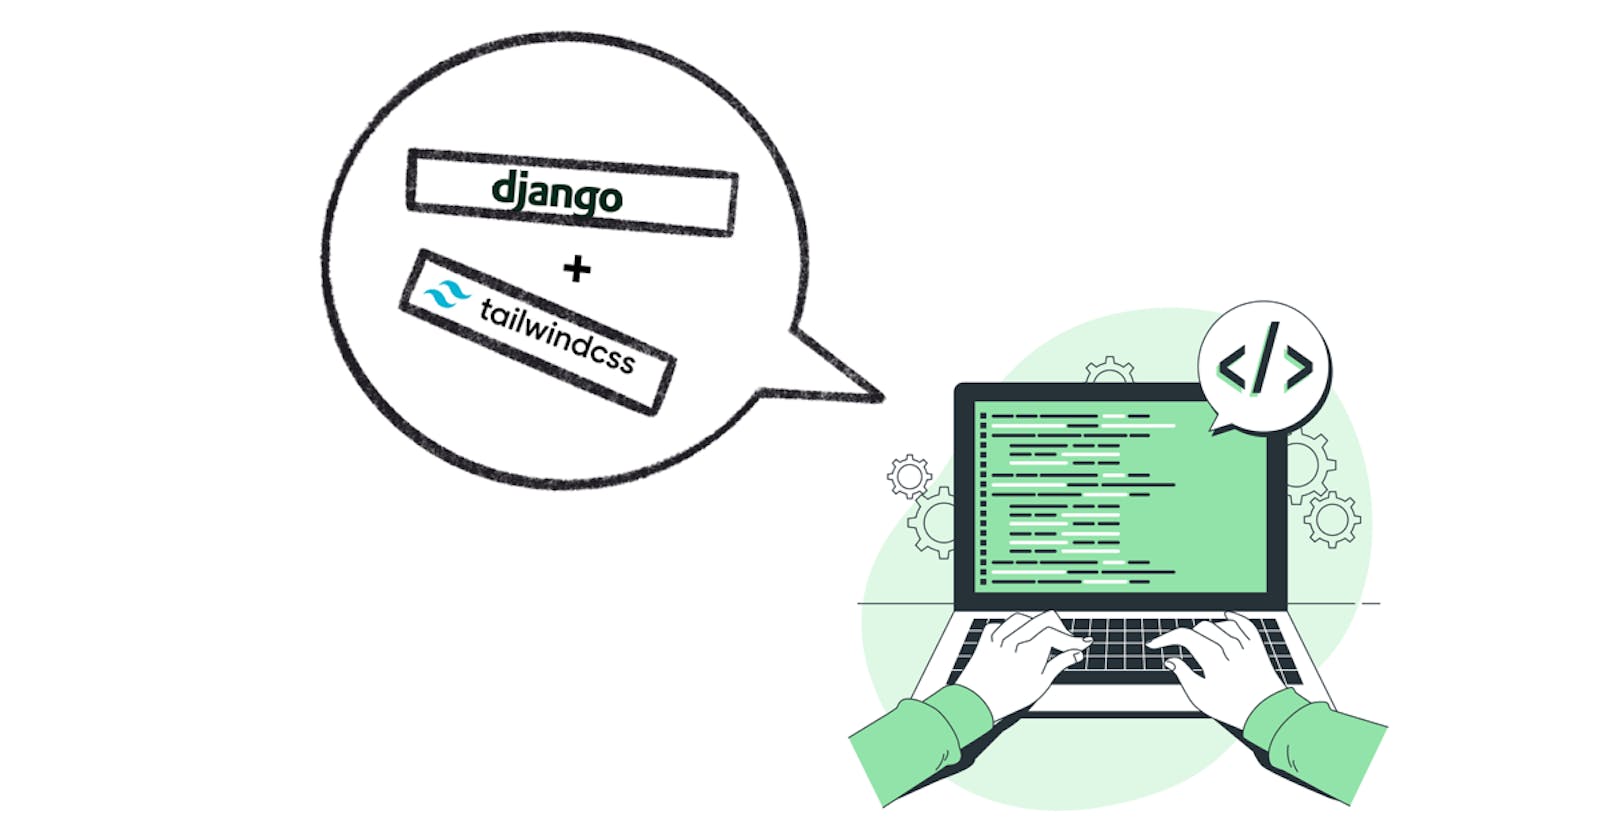 How to integrate Tailwind CSS into your Django Project